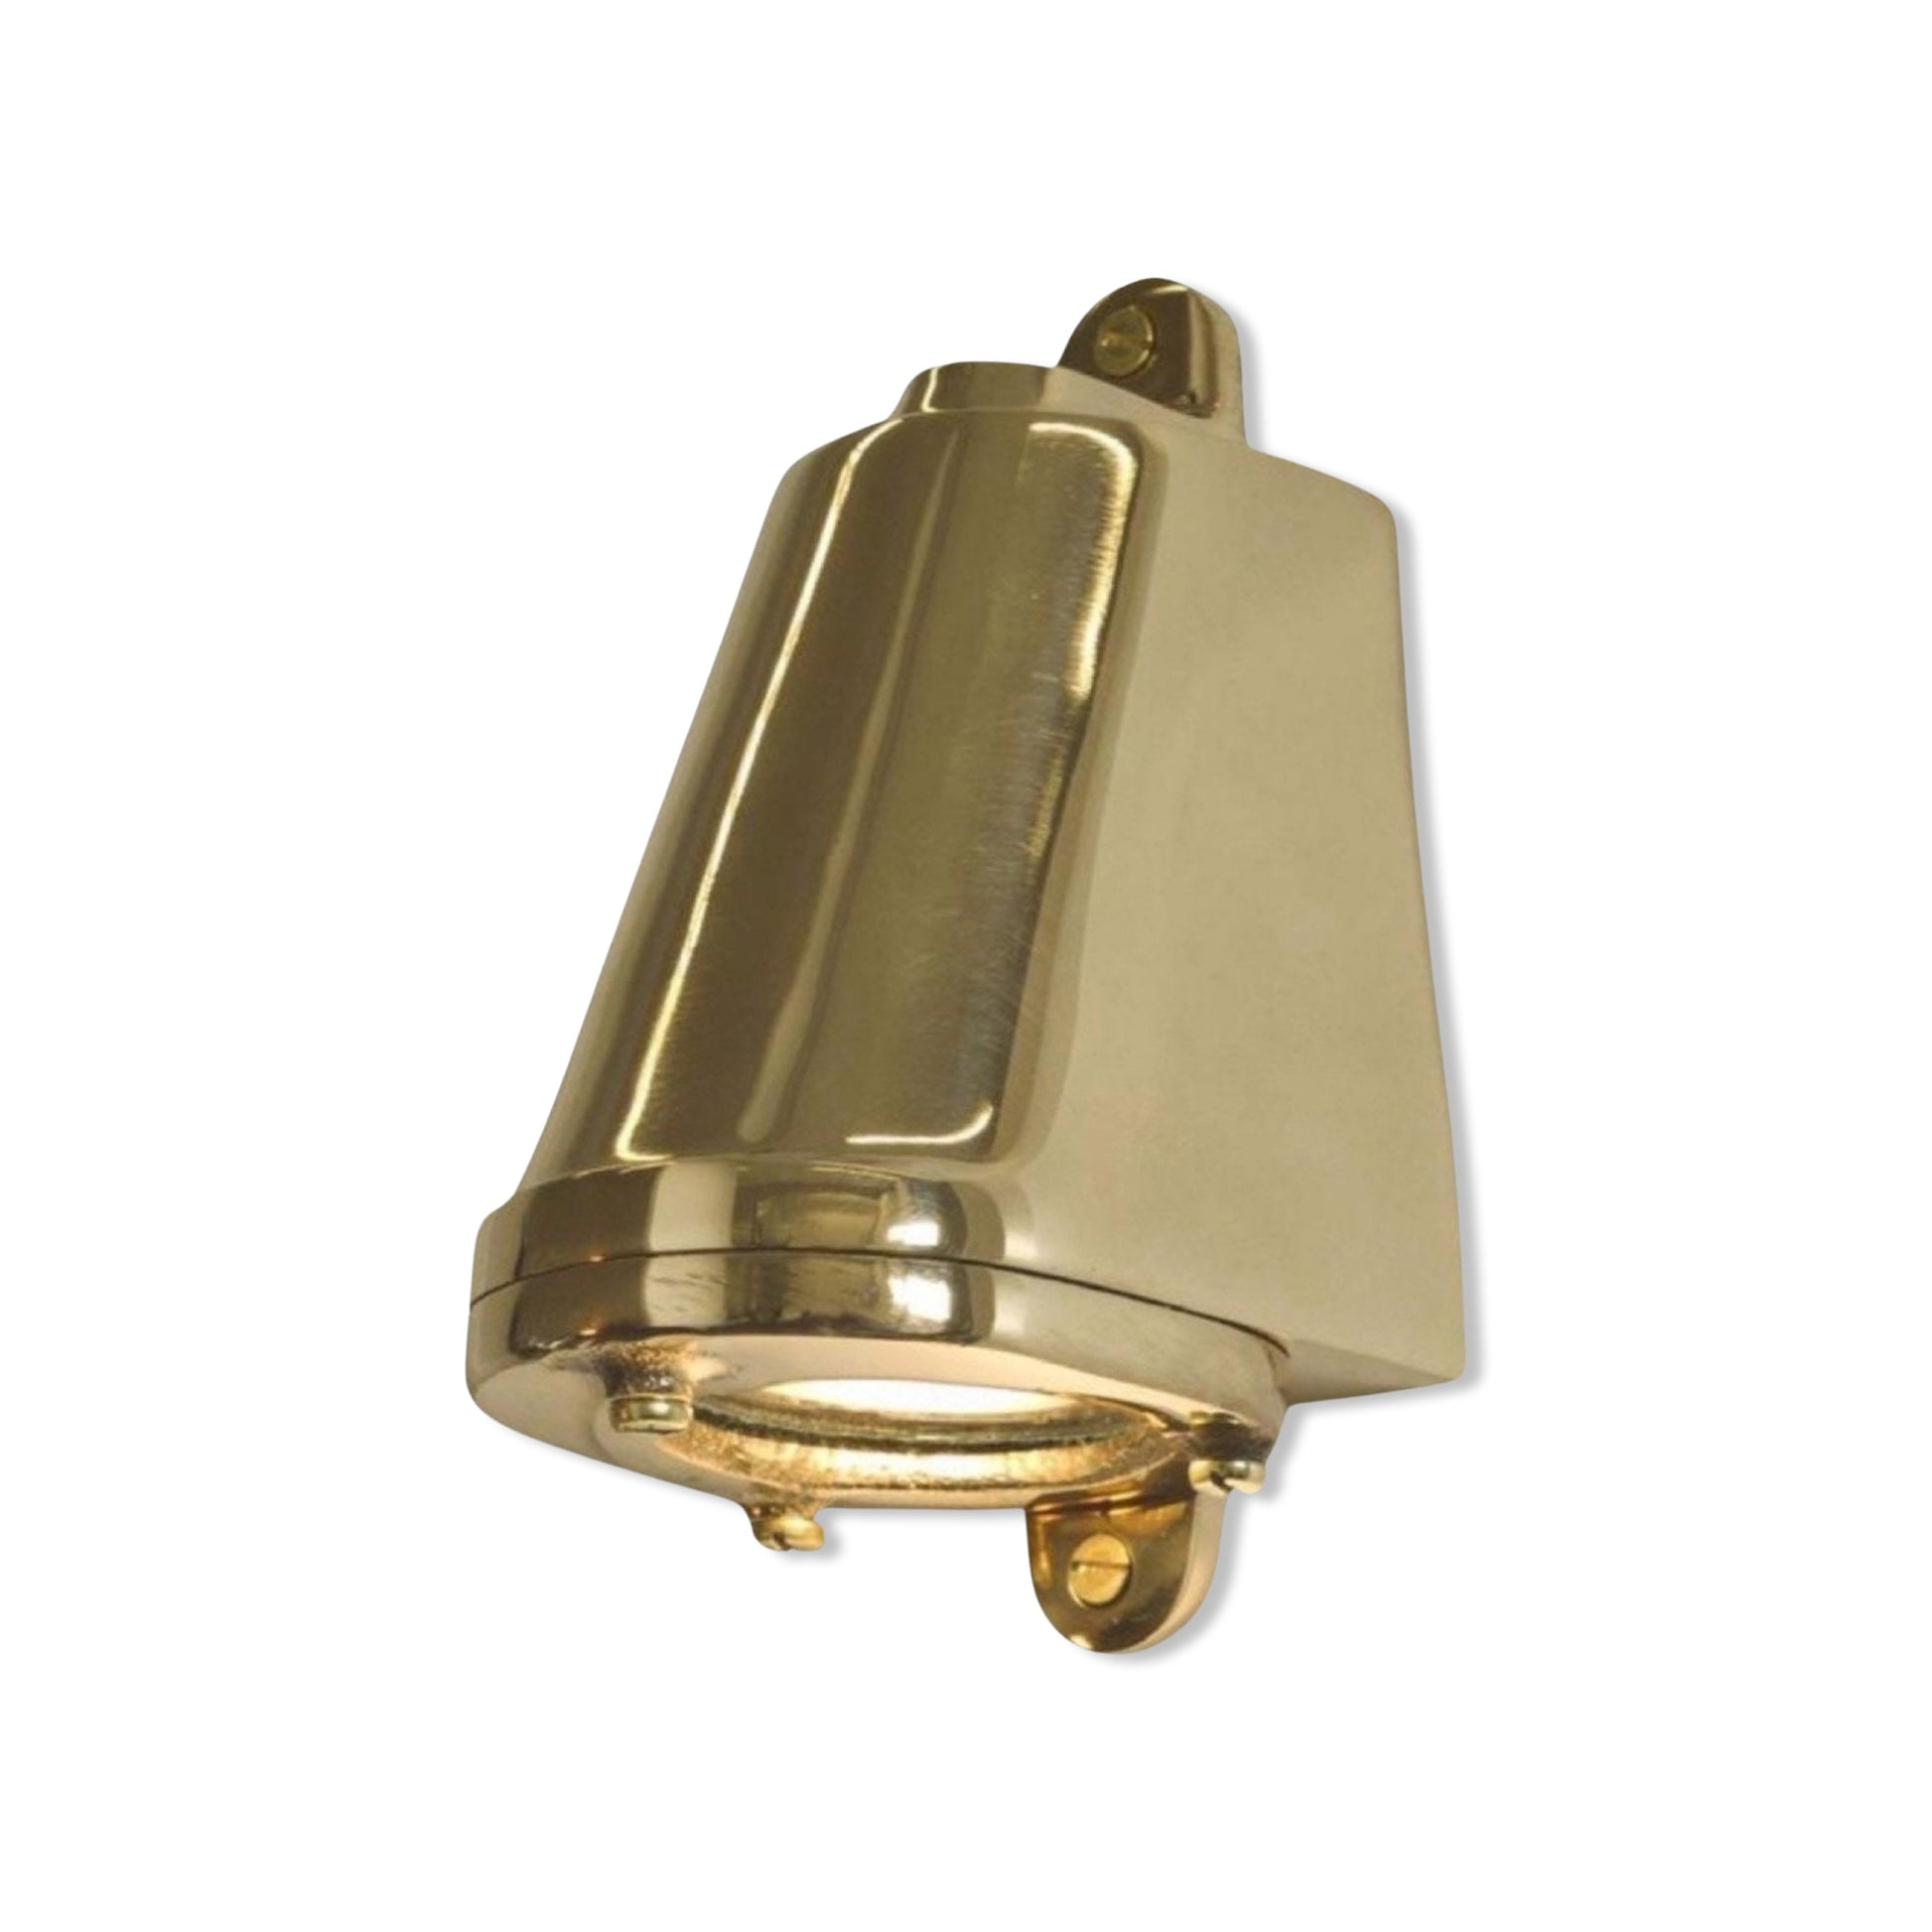 Holt ~ Outdoor & Bathroom Mast Down Wall Light LED Solid Brass | 5 Inch